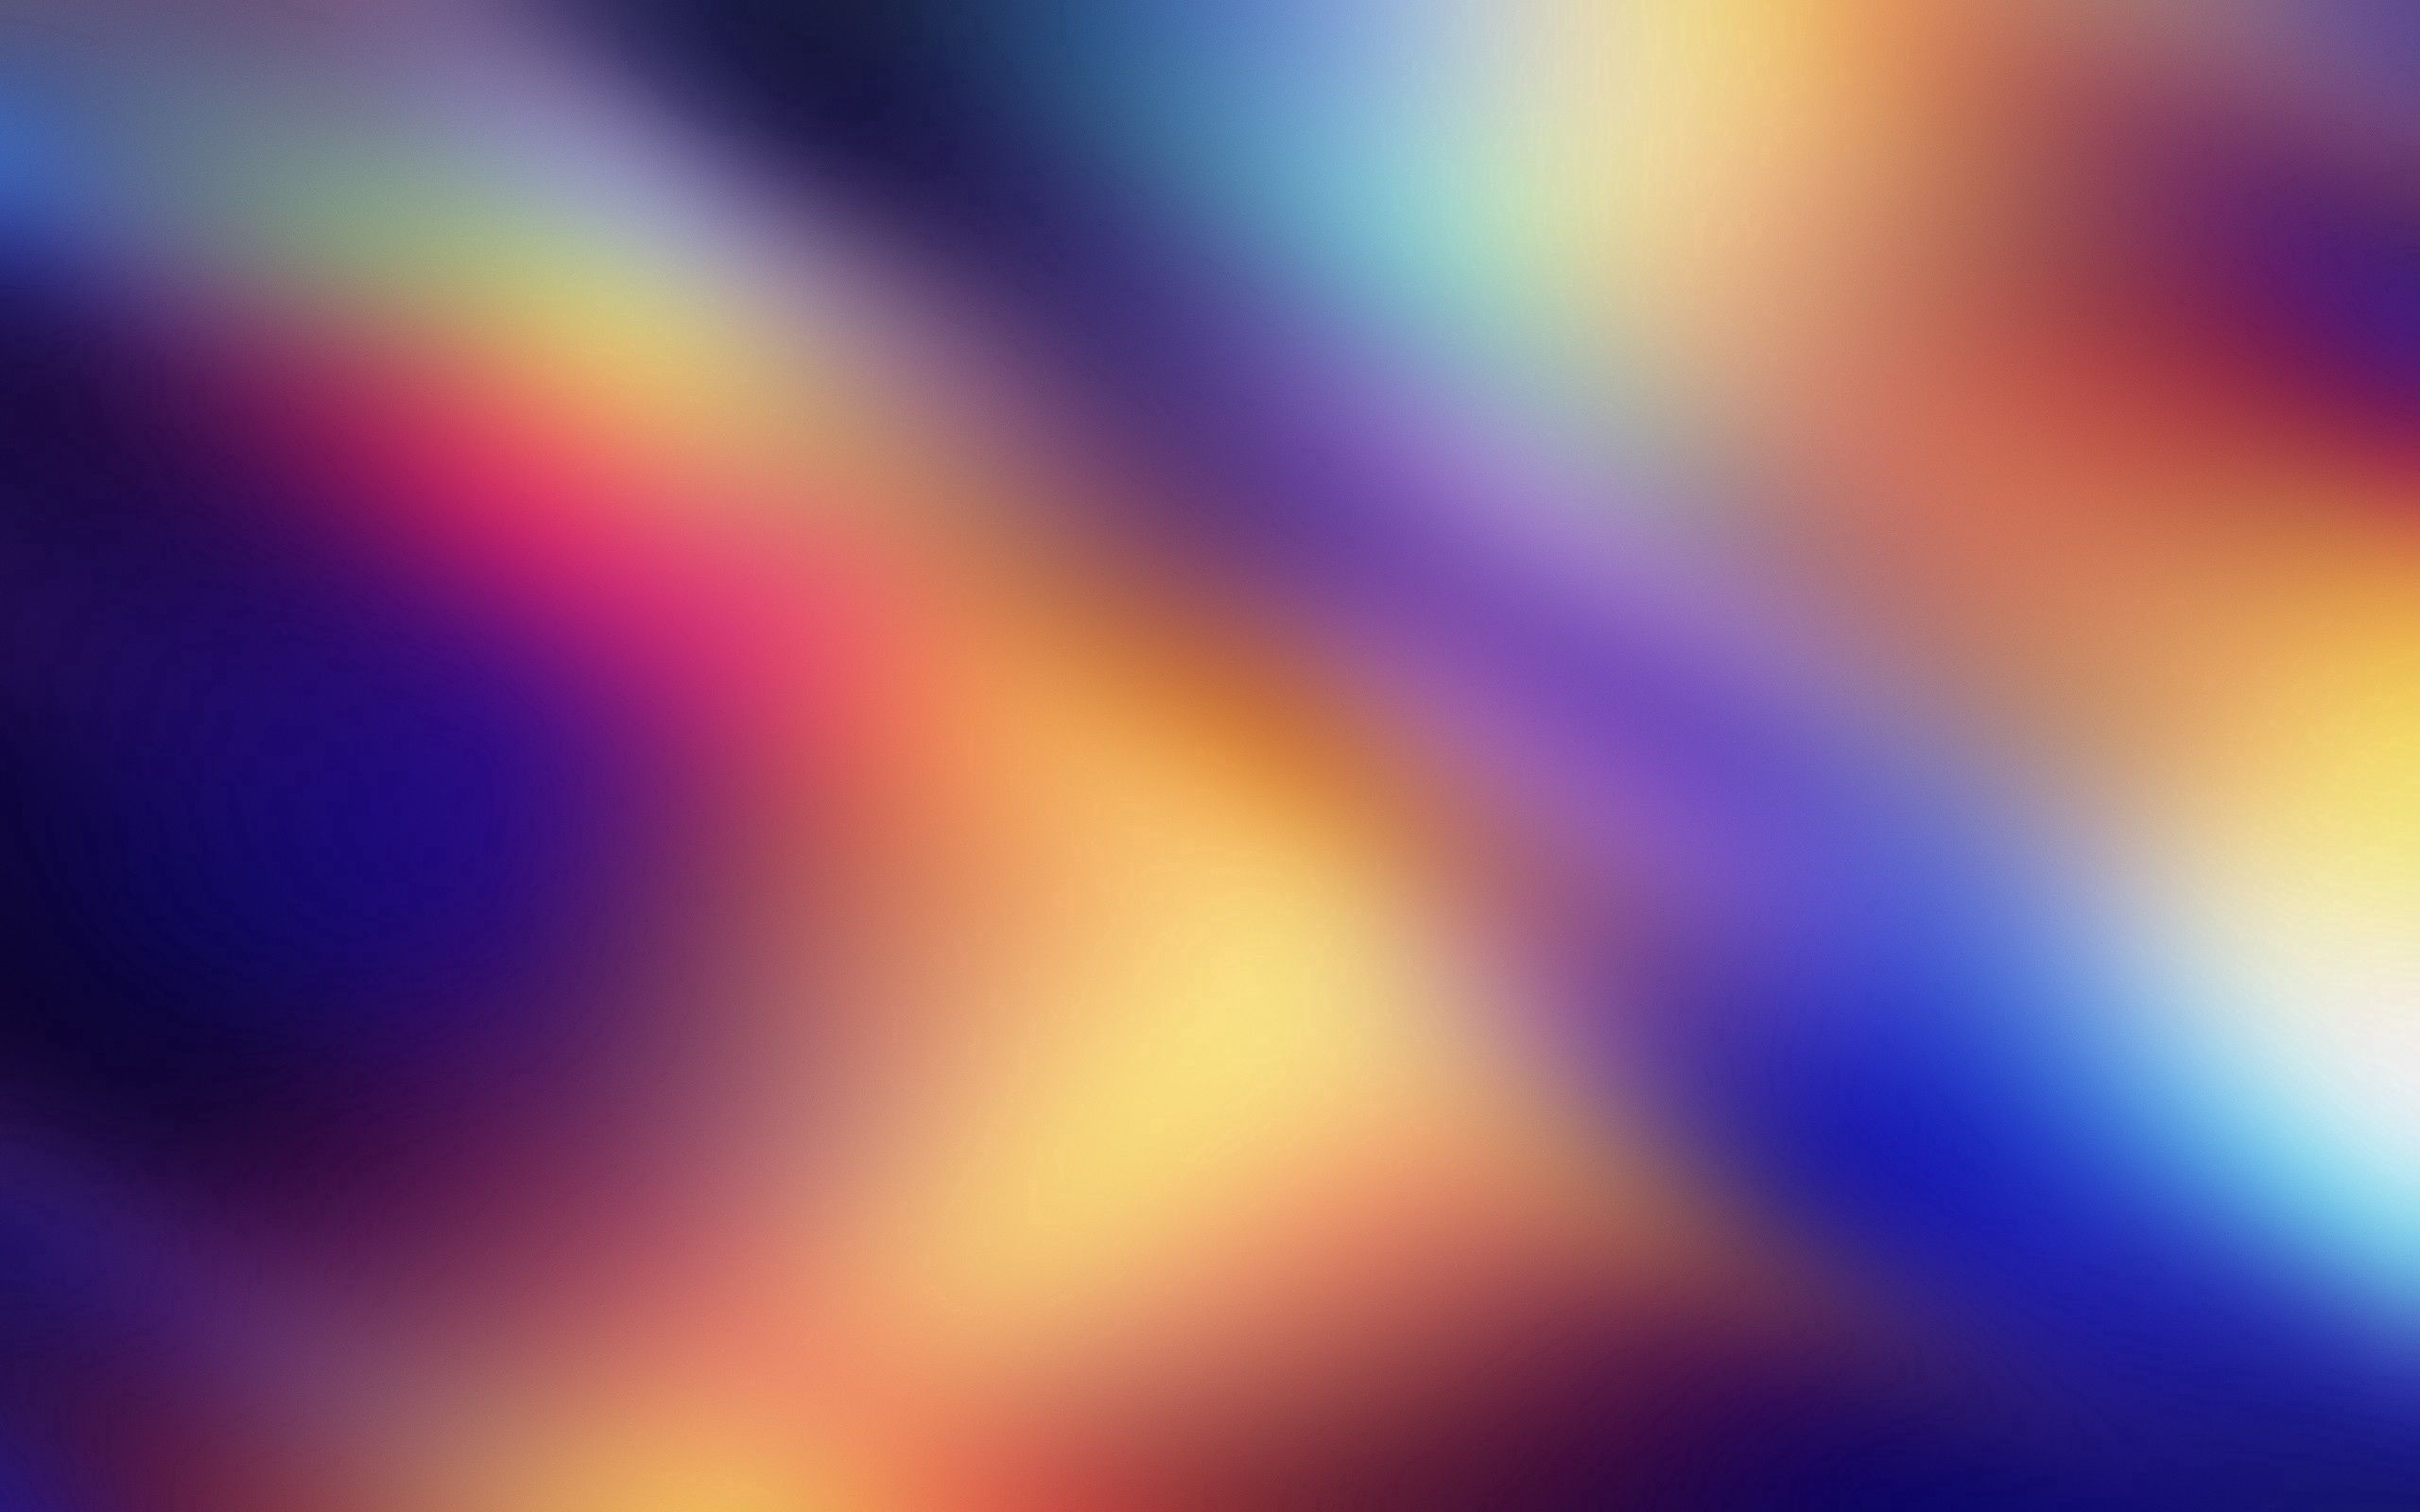 colorful, blurred, abstract, rainbow, colourful, iridescent, greased cell phone wallpapers